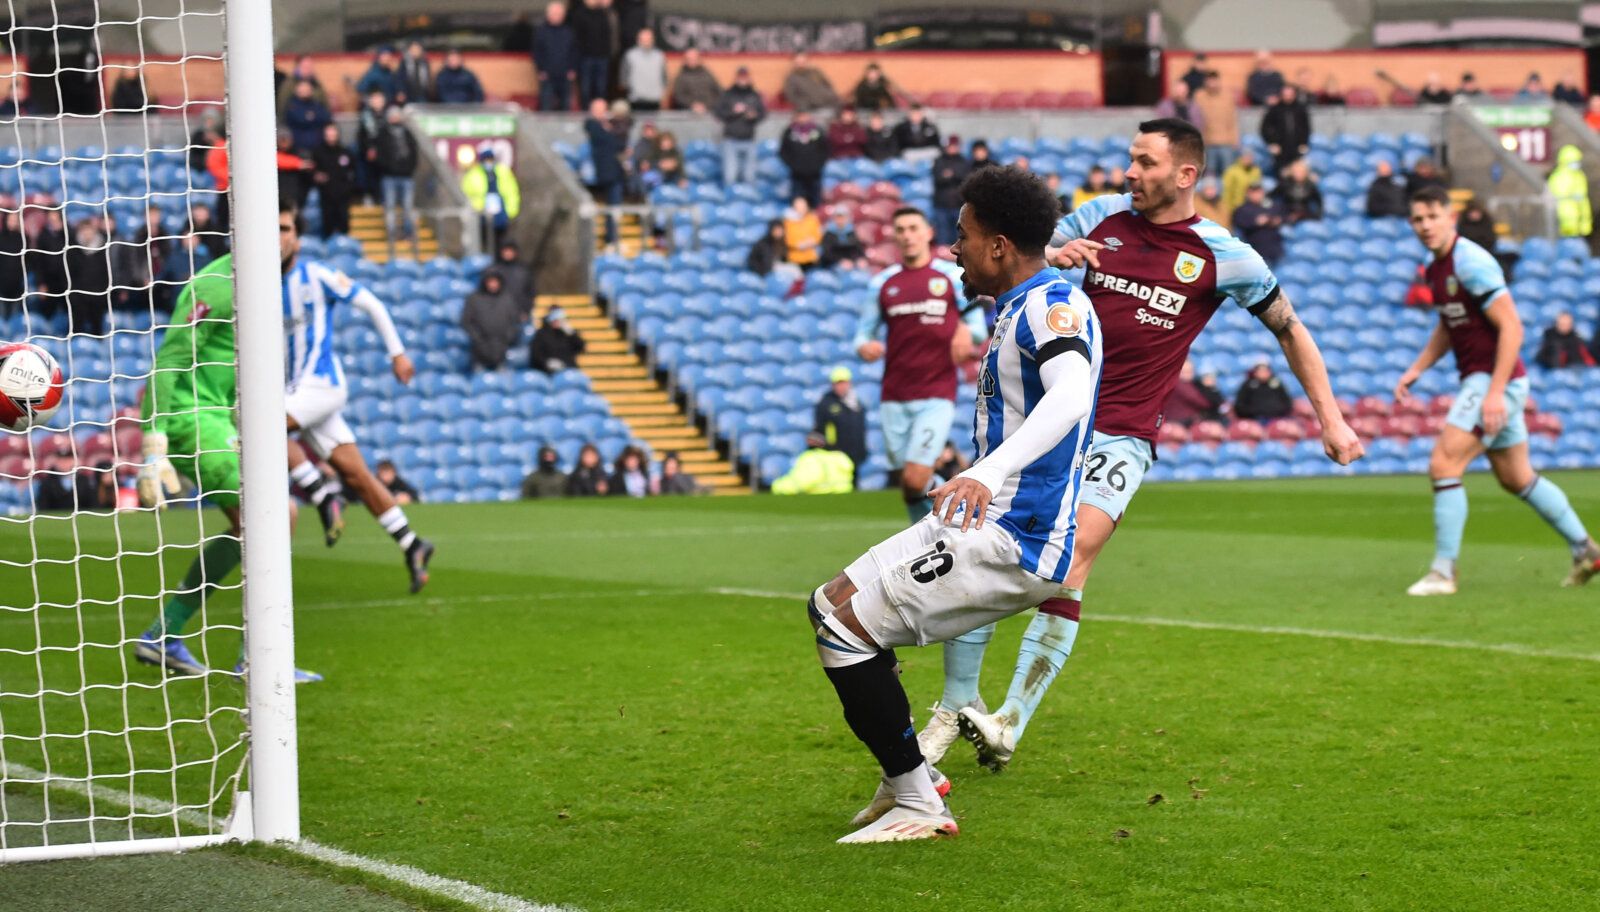 Soccer Football - FA Cup Third Round - Burnley v Huddersfield Town - Turf Moor, Burnley, Britain - January 8, 2022 Huddersfield Town's Josh Koroma scores their first goal REUTERS/Peter Powell